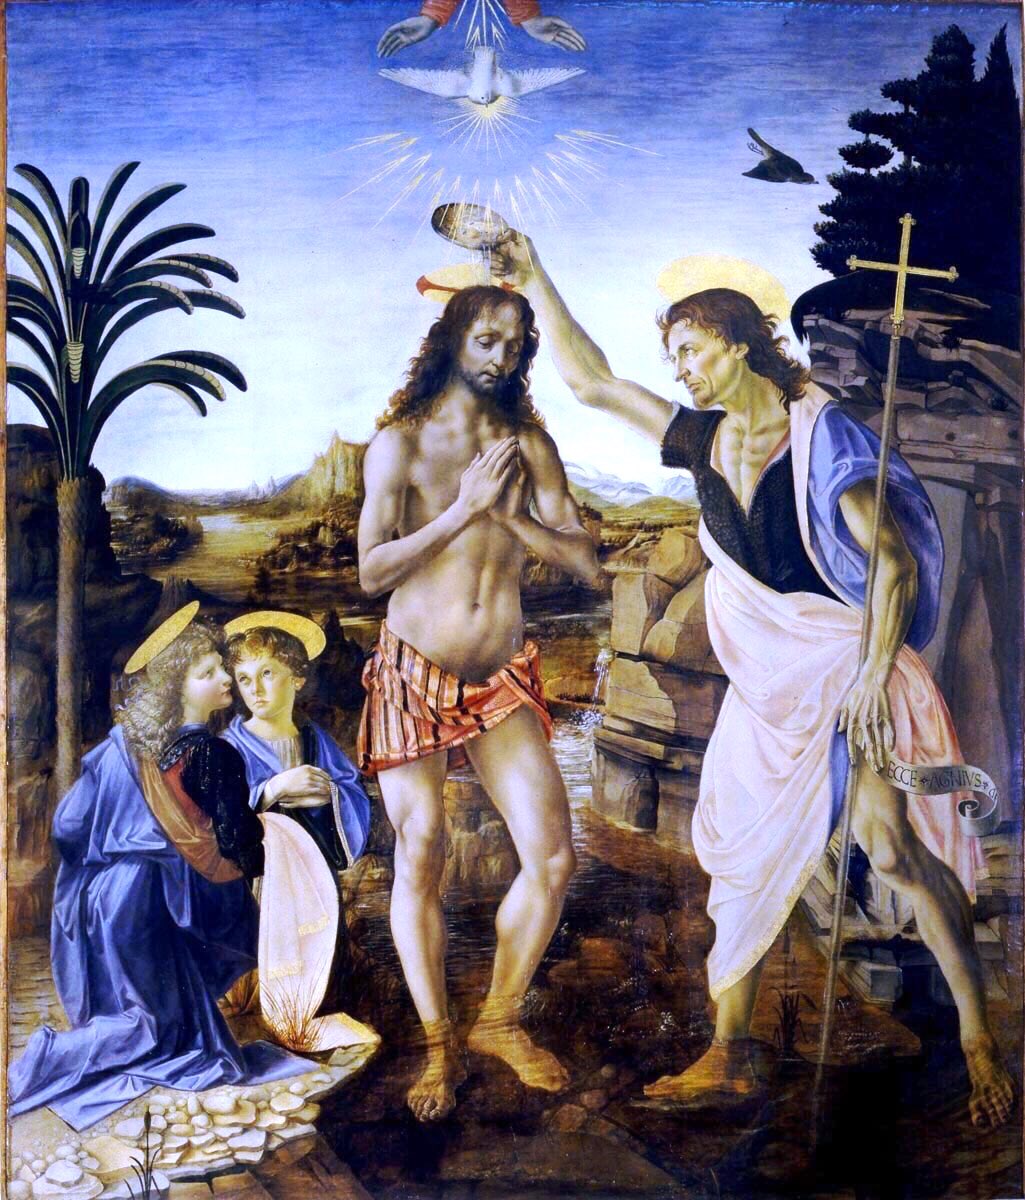 In 1466 he was apprenticed to the great teacher Verrocchio. His fellow students were major artists too - Botticelli, Perugino, Ghirlandaio & di Credi! Leonardo worked with Verrocchio on some of his pictures including Tobias & the Angel, 1470-5 & Baptism of Christ (1472-5)